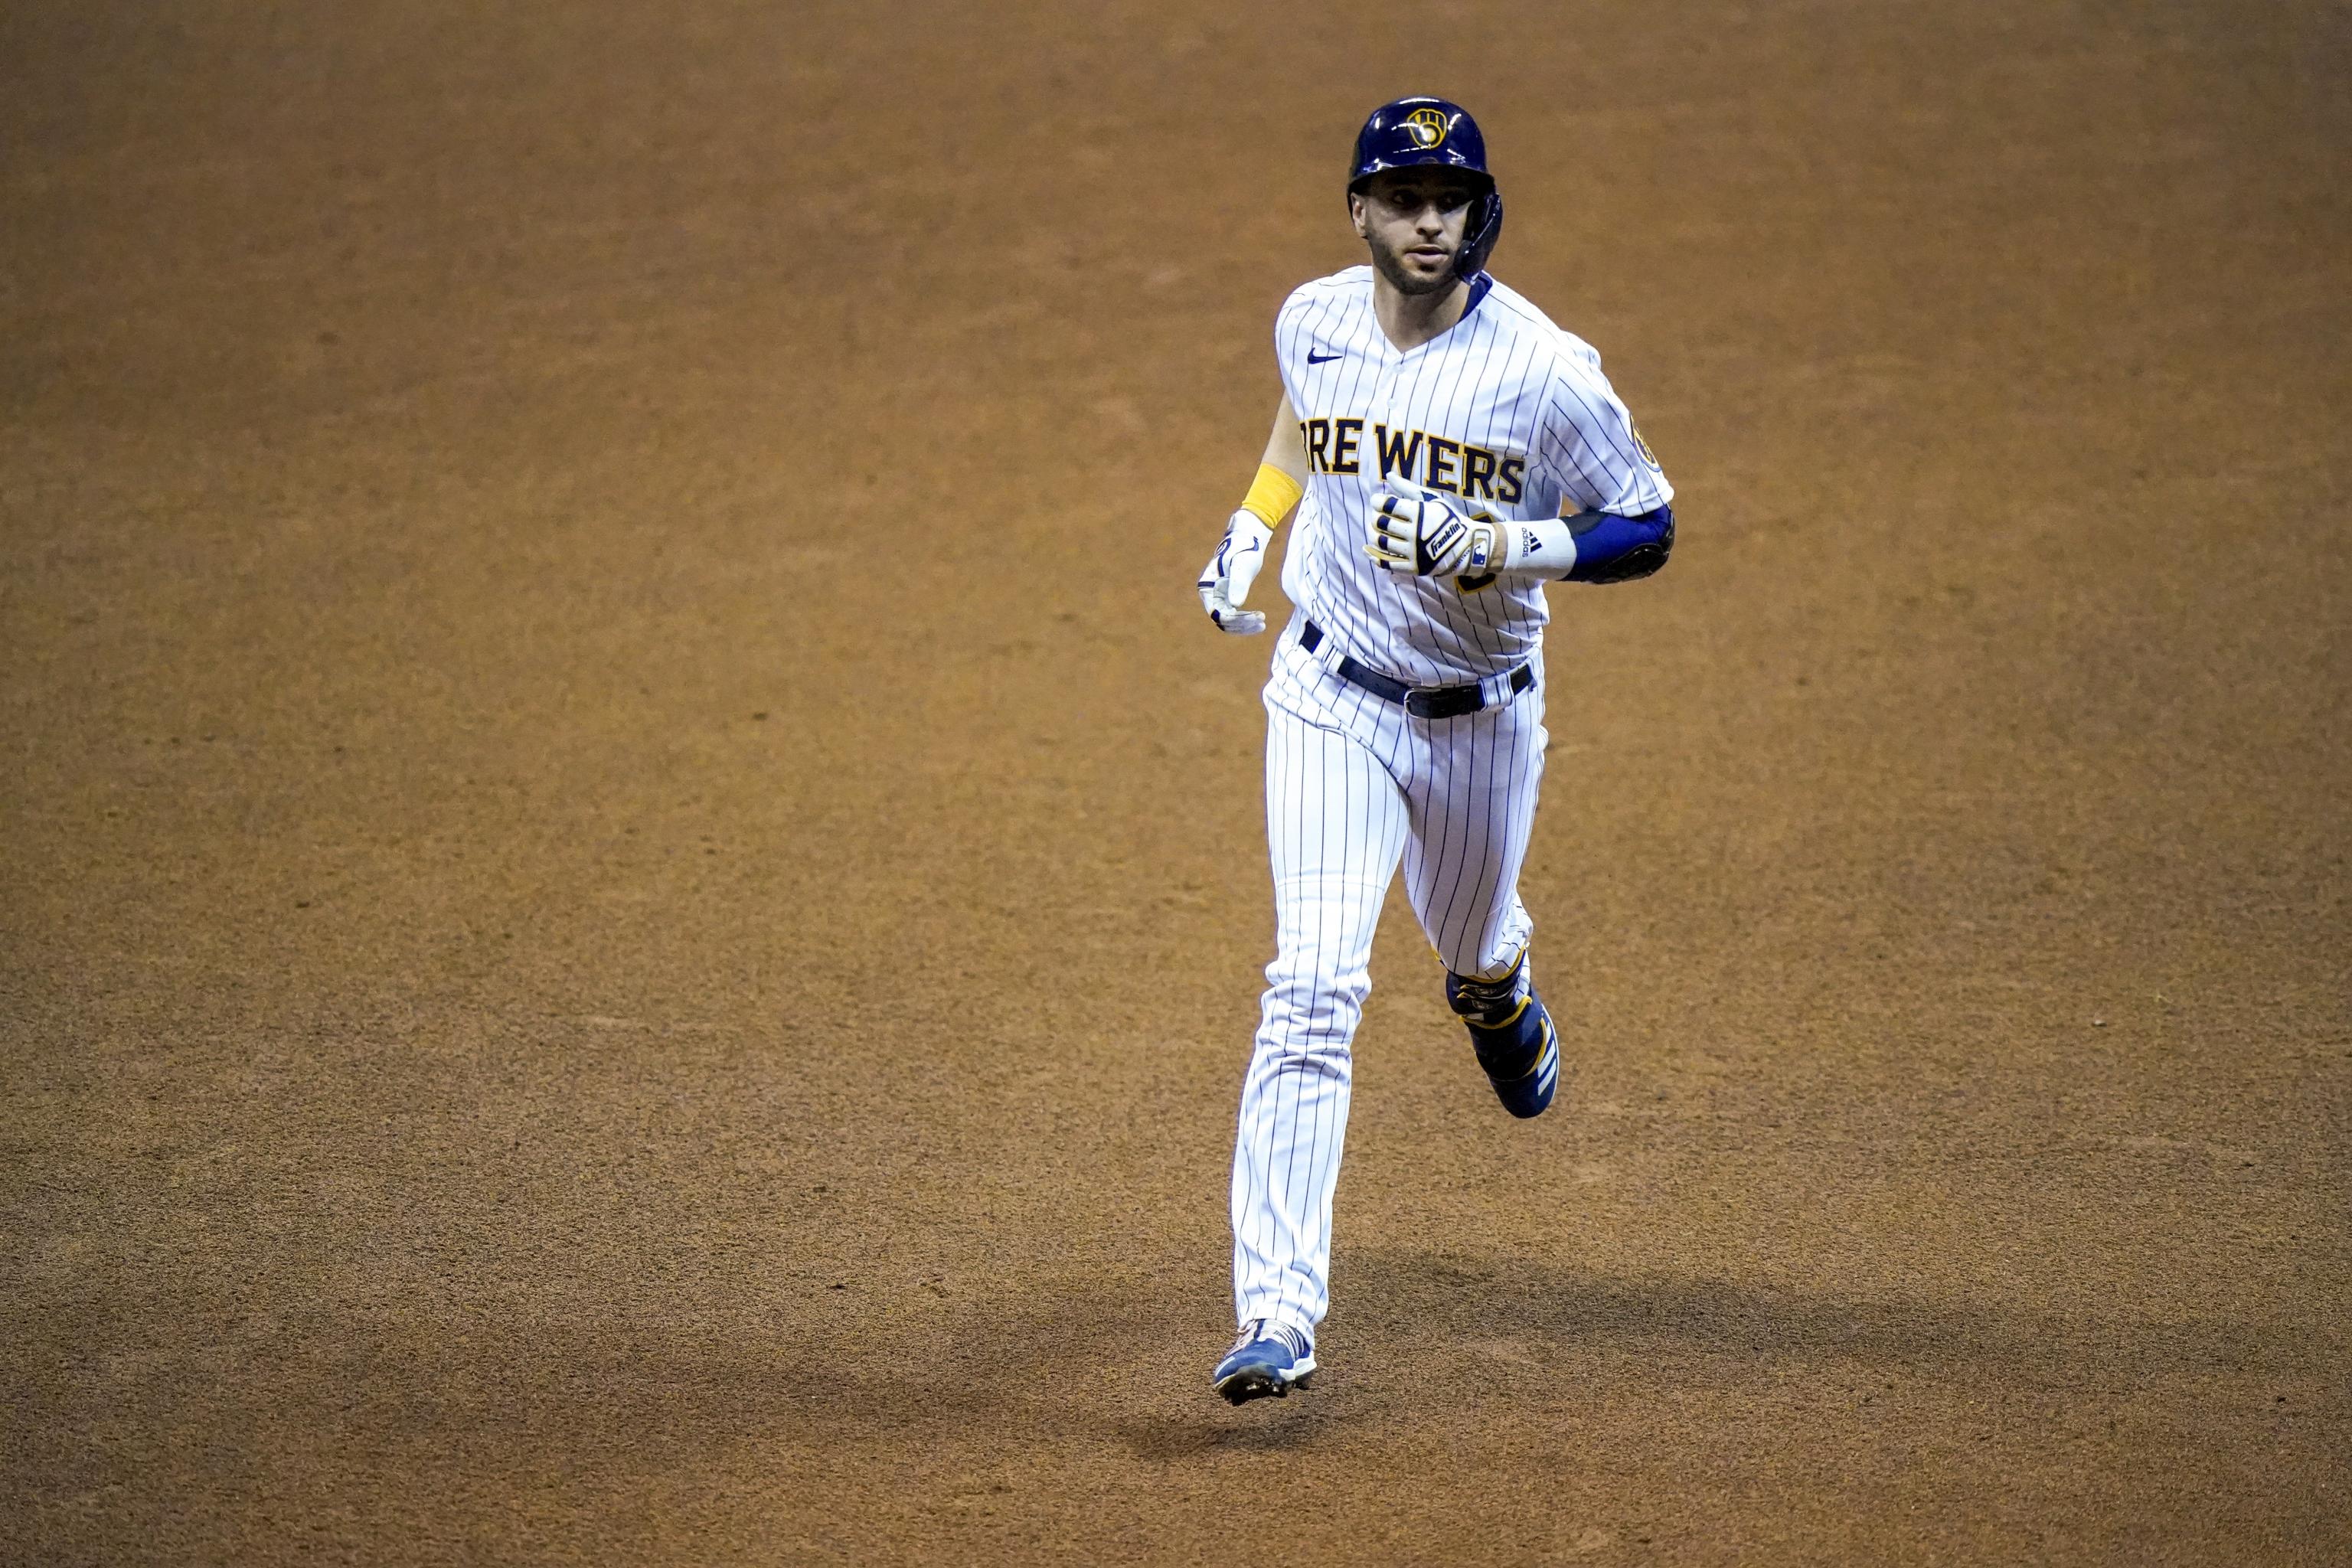 Ryan Braun retires after 14 seasons with the Milwaukee Brewers - Brew Crew  Ball